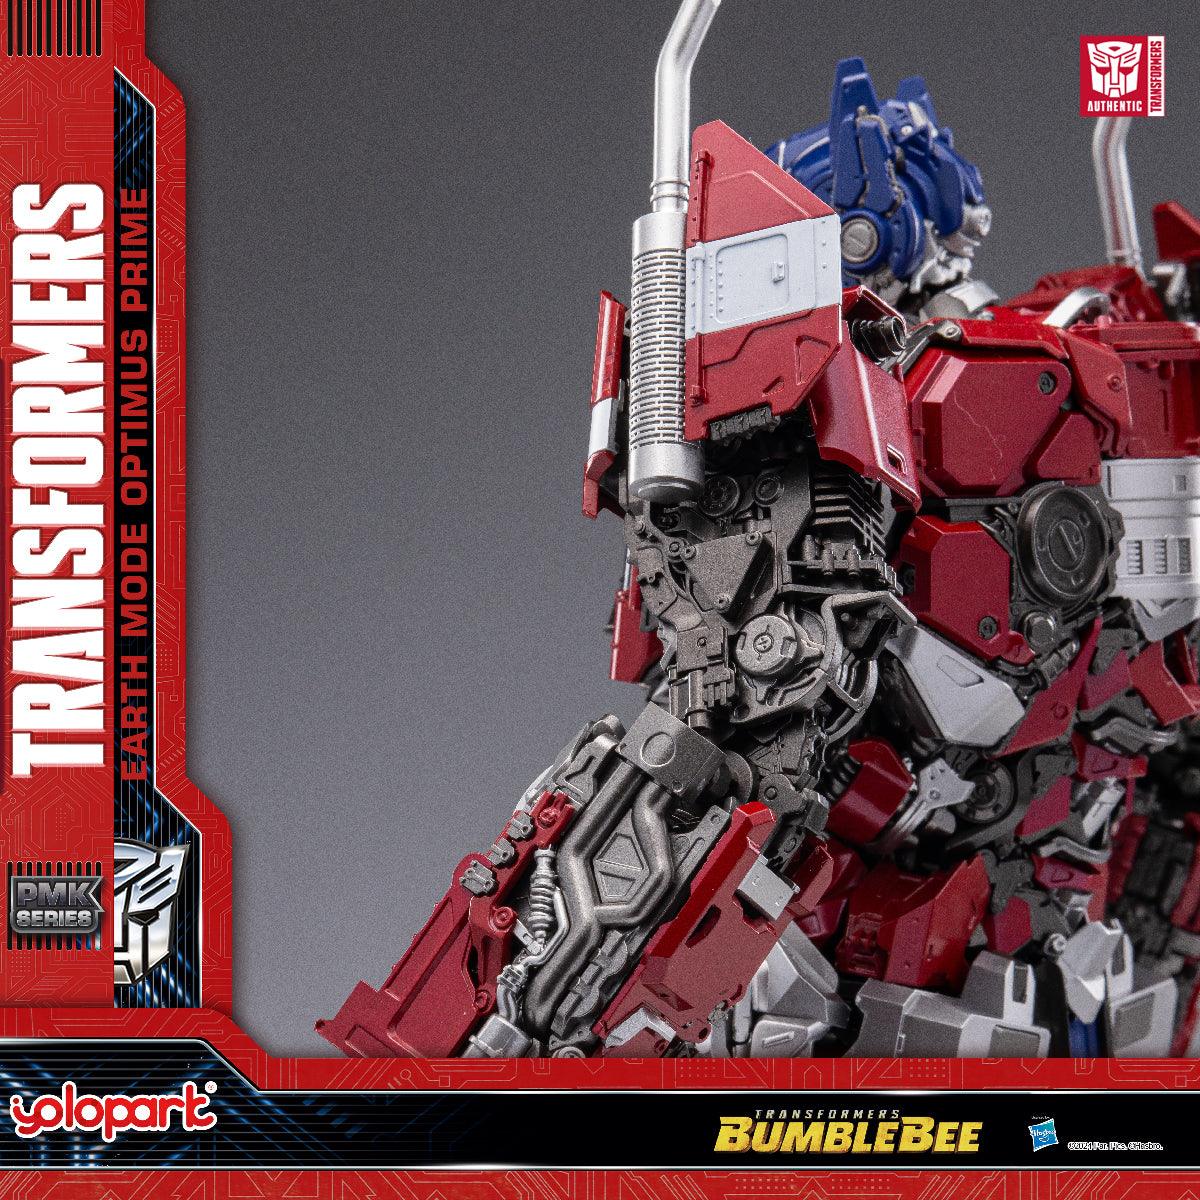 Yolopark Revealed Another Officially Licensed Transformers Model